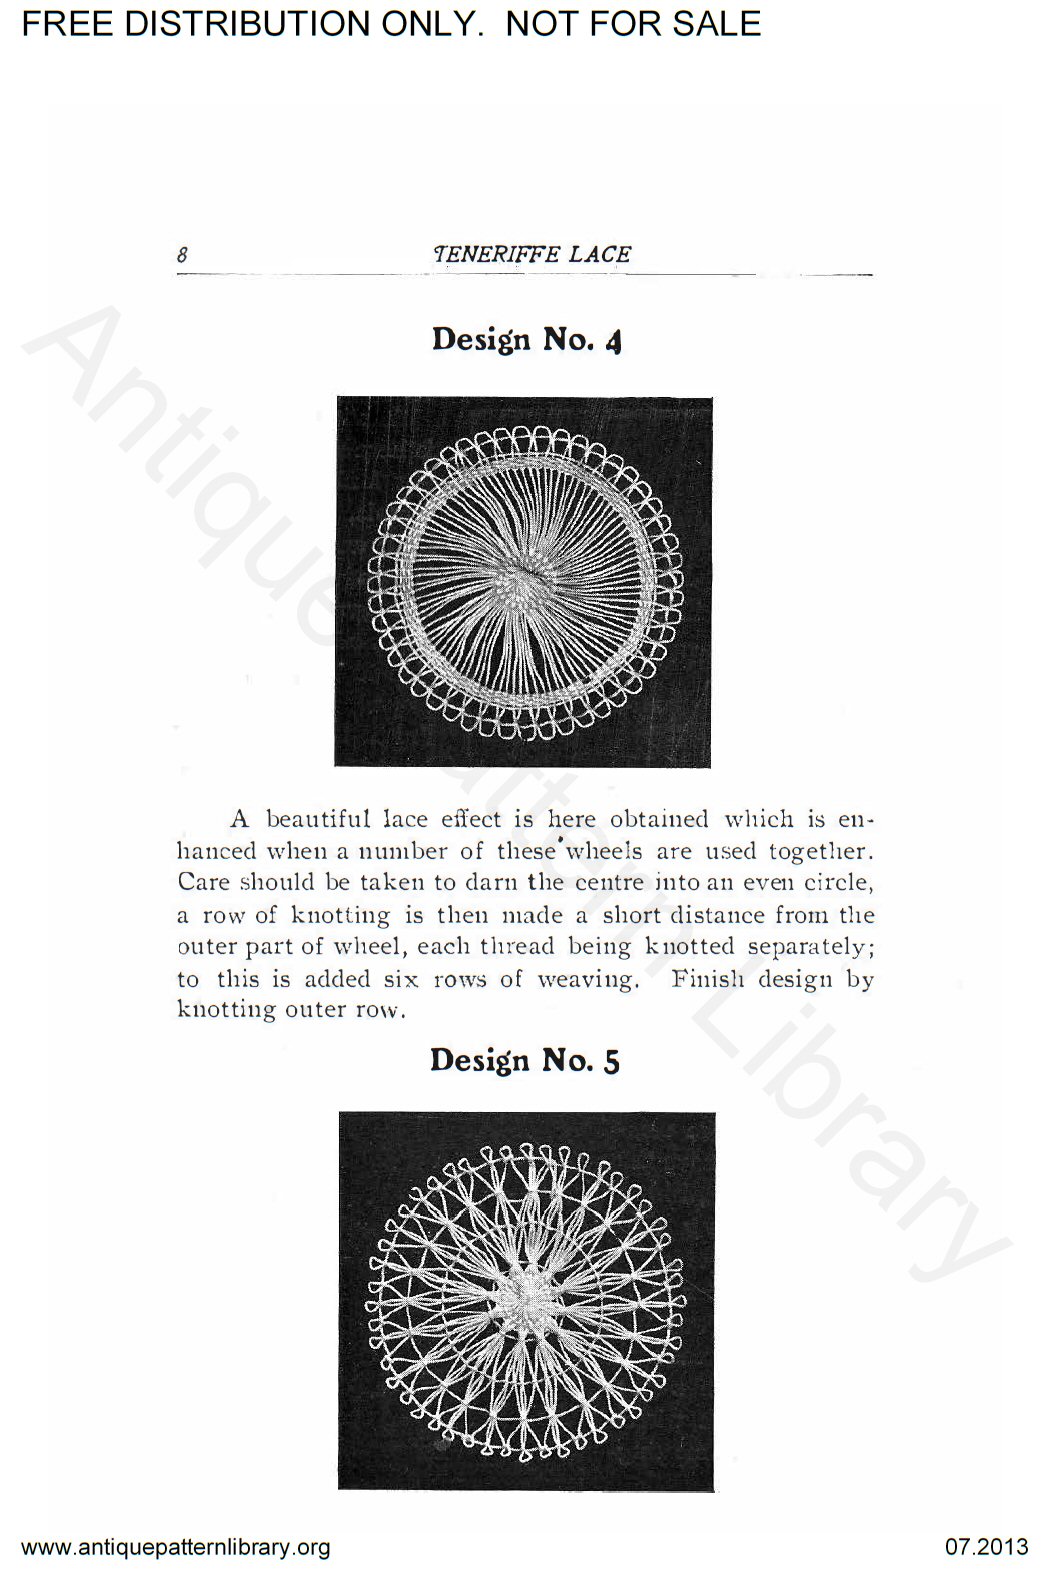 6-DS001 Teneriffe Lace Designs and Instructions.